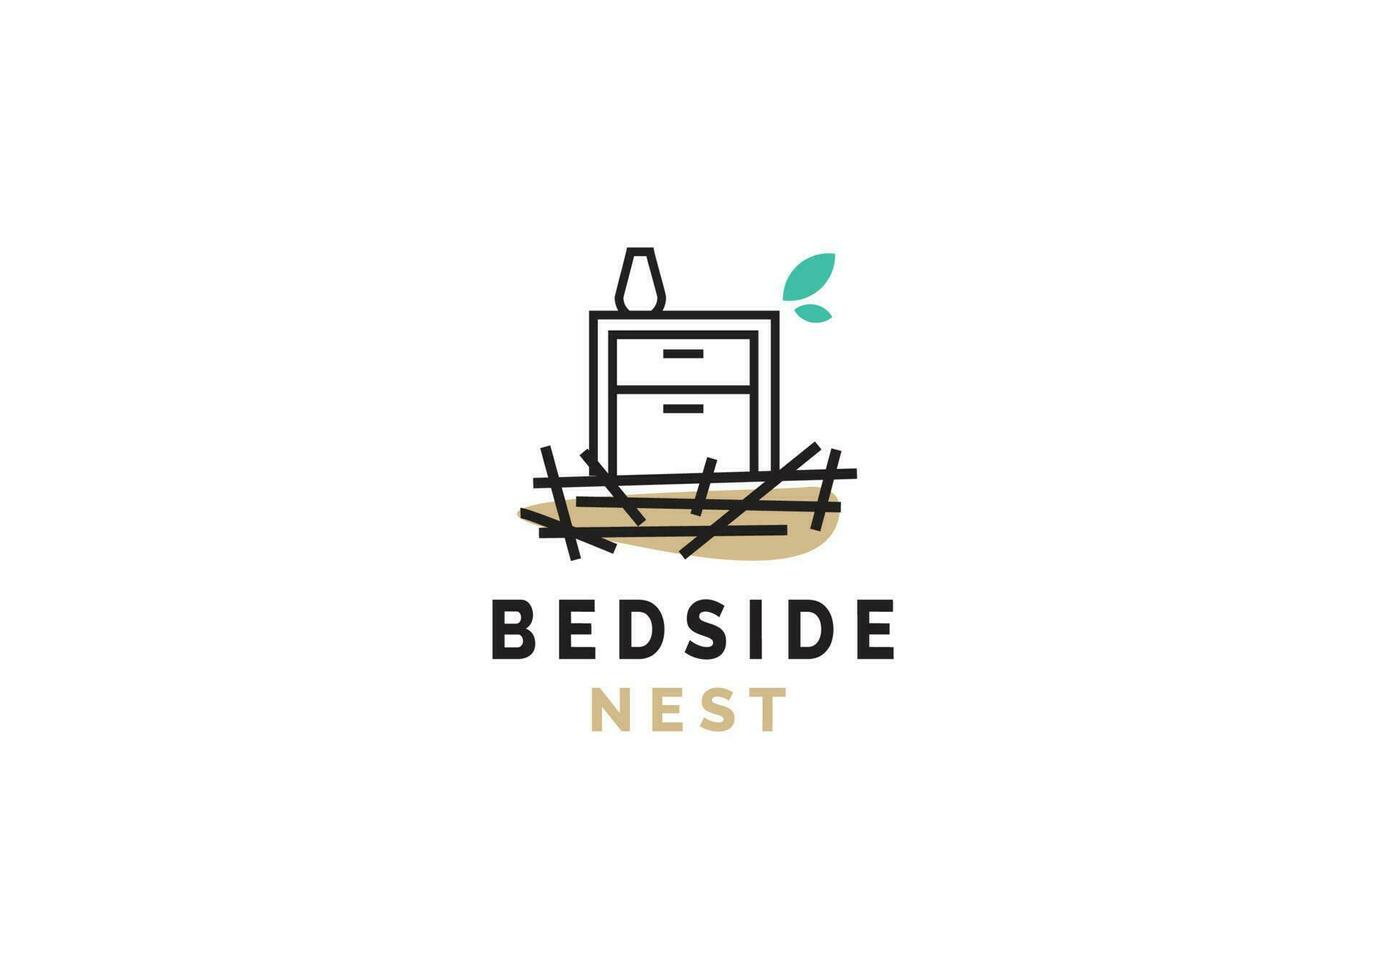 natural bedside furniture with nest logo vector icon illustration for industry